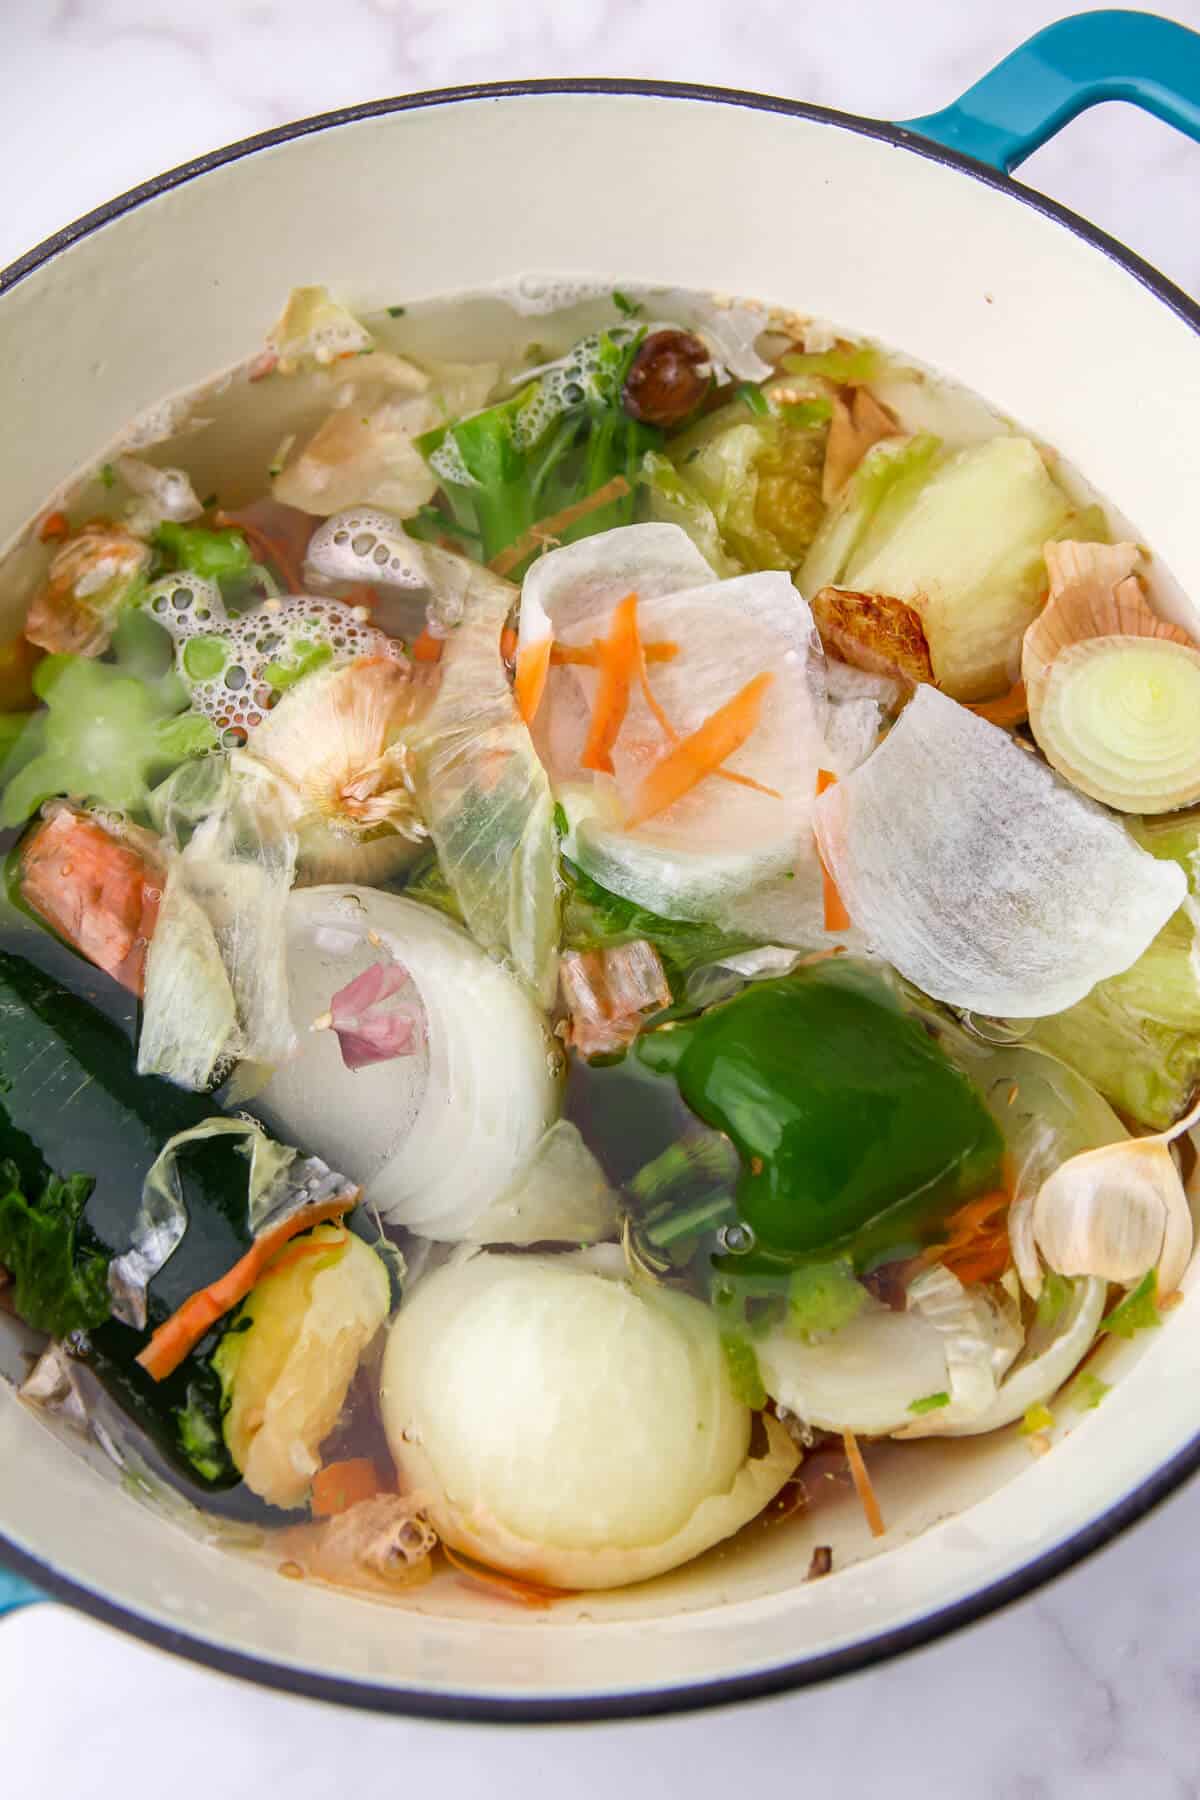 A soup pot full of vegetable scraps and water to make homemade broth.